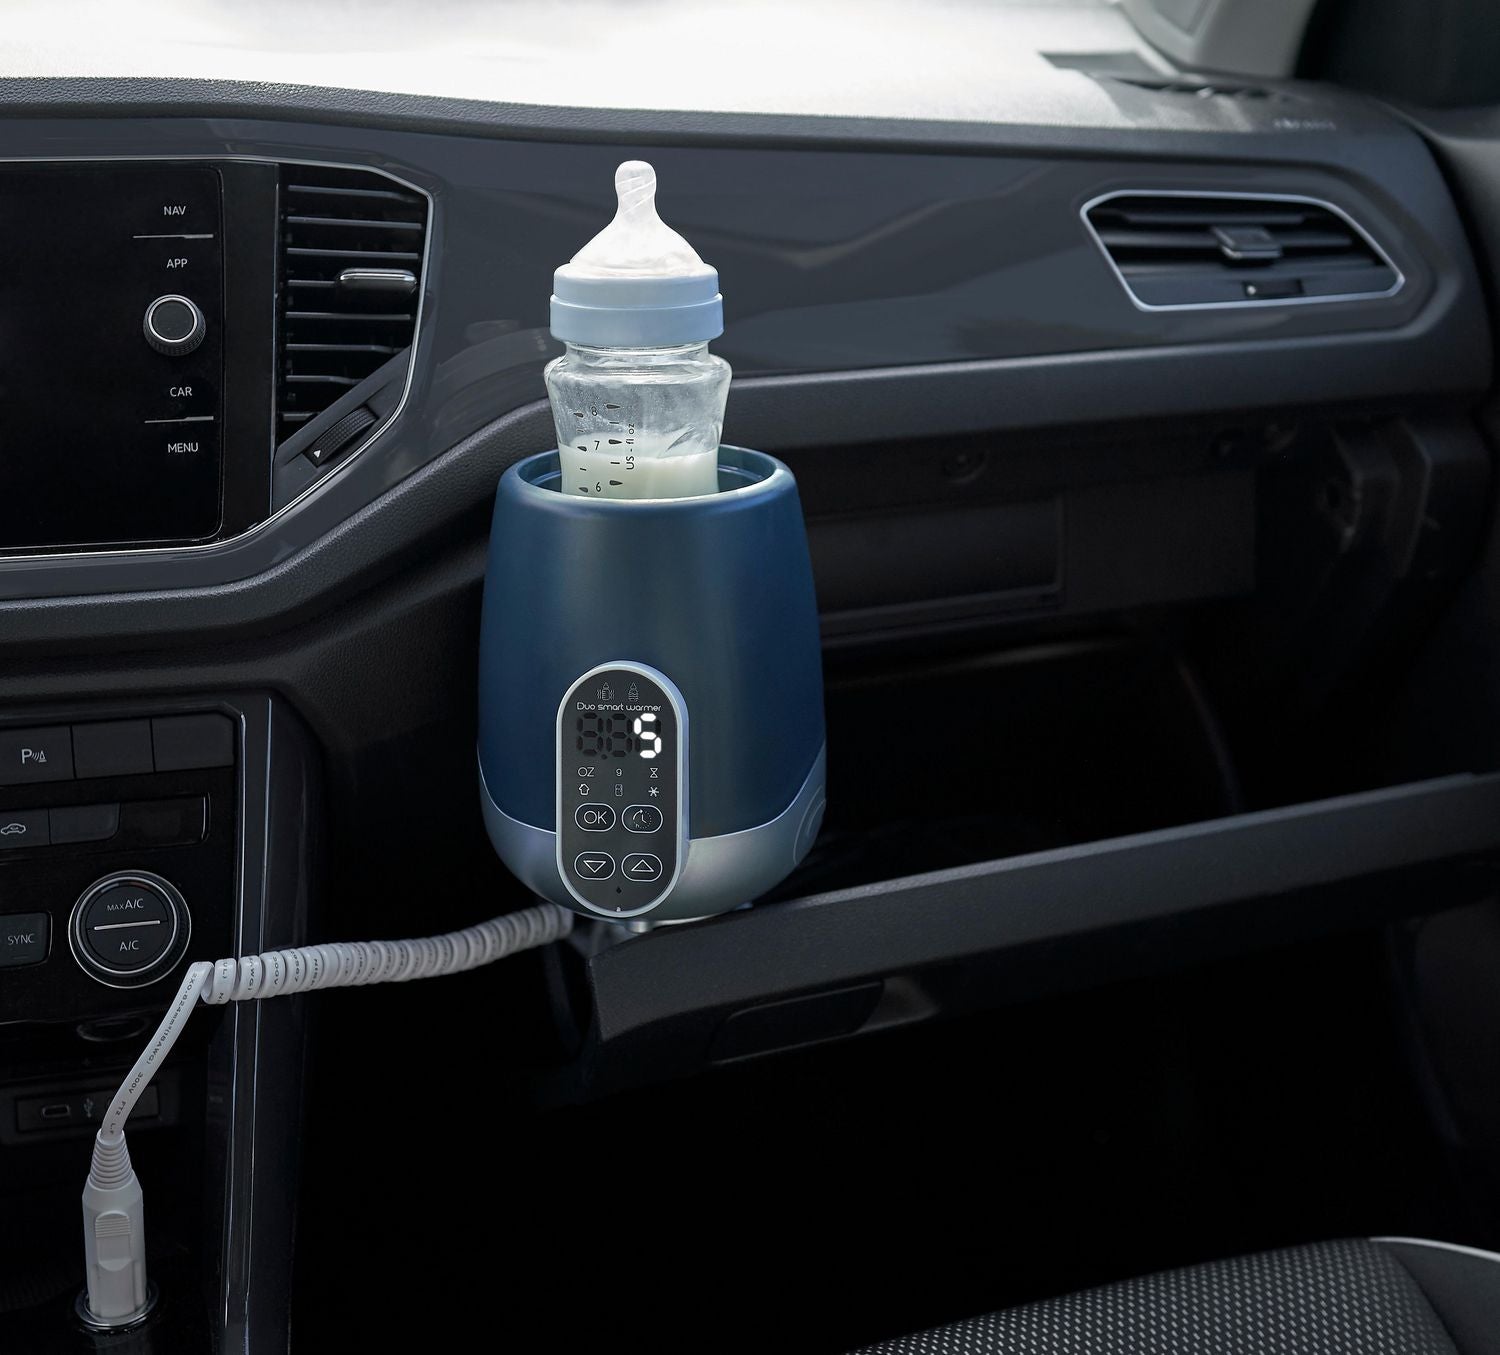 Replacement Car Adaptor Duo Smart Bottle Warmer- White